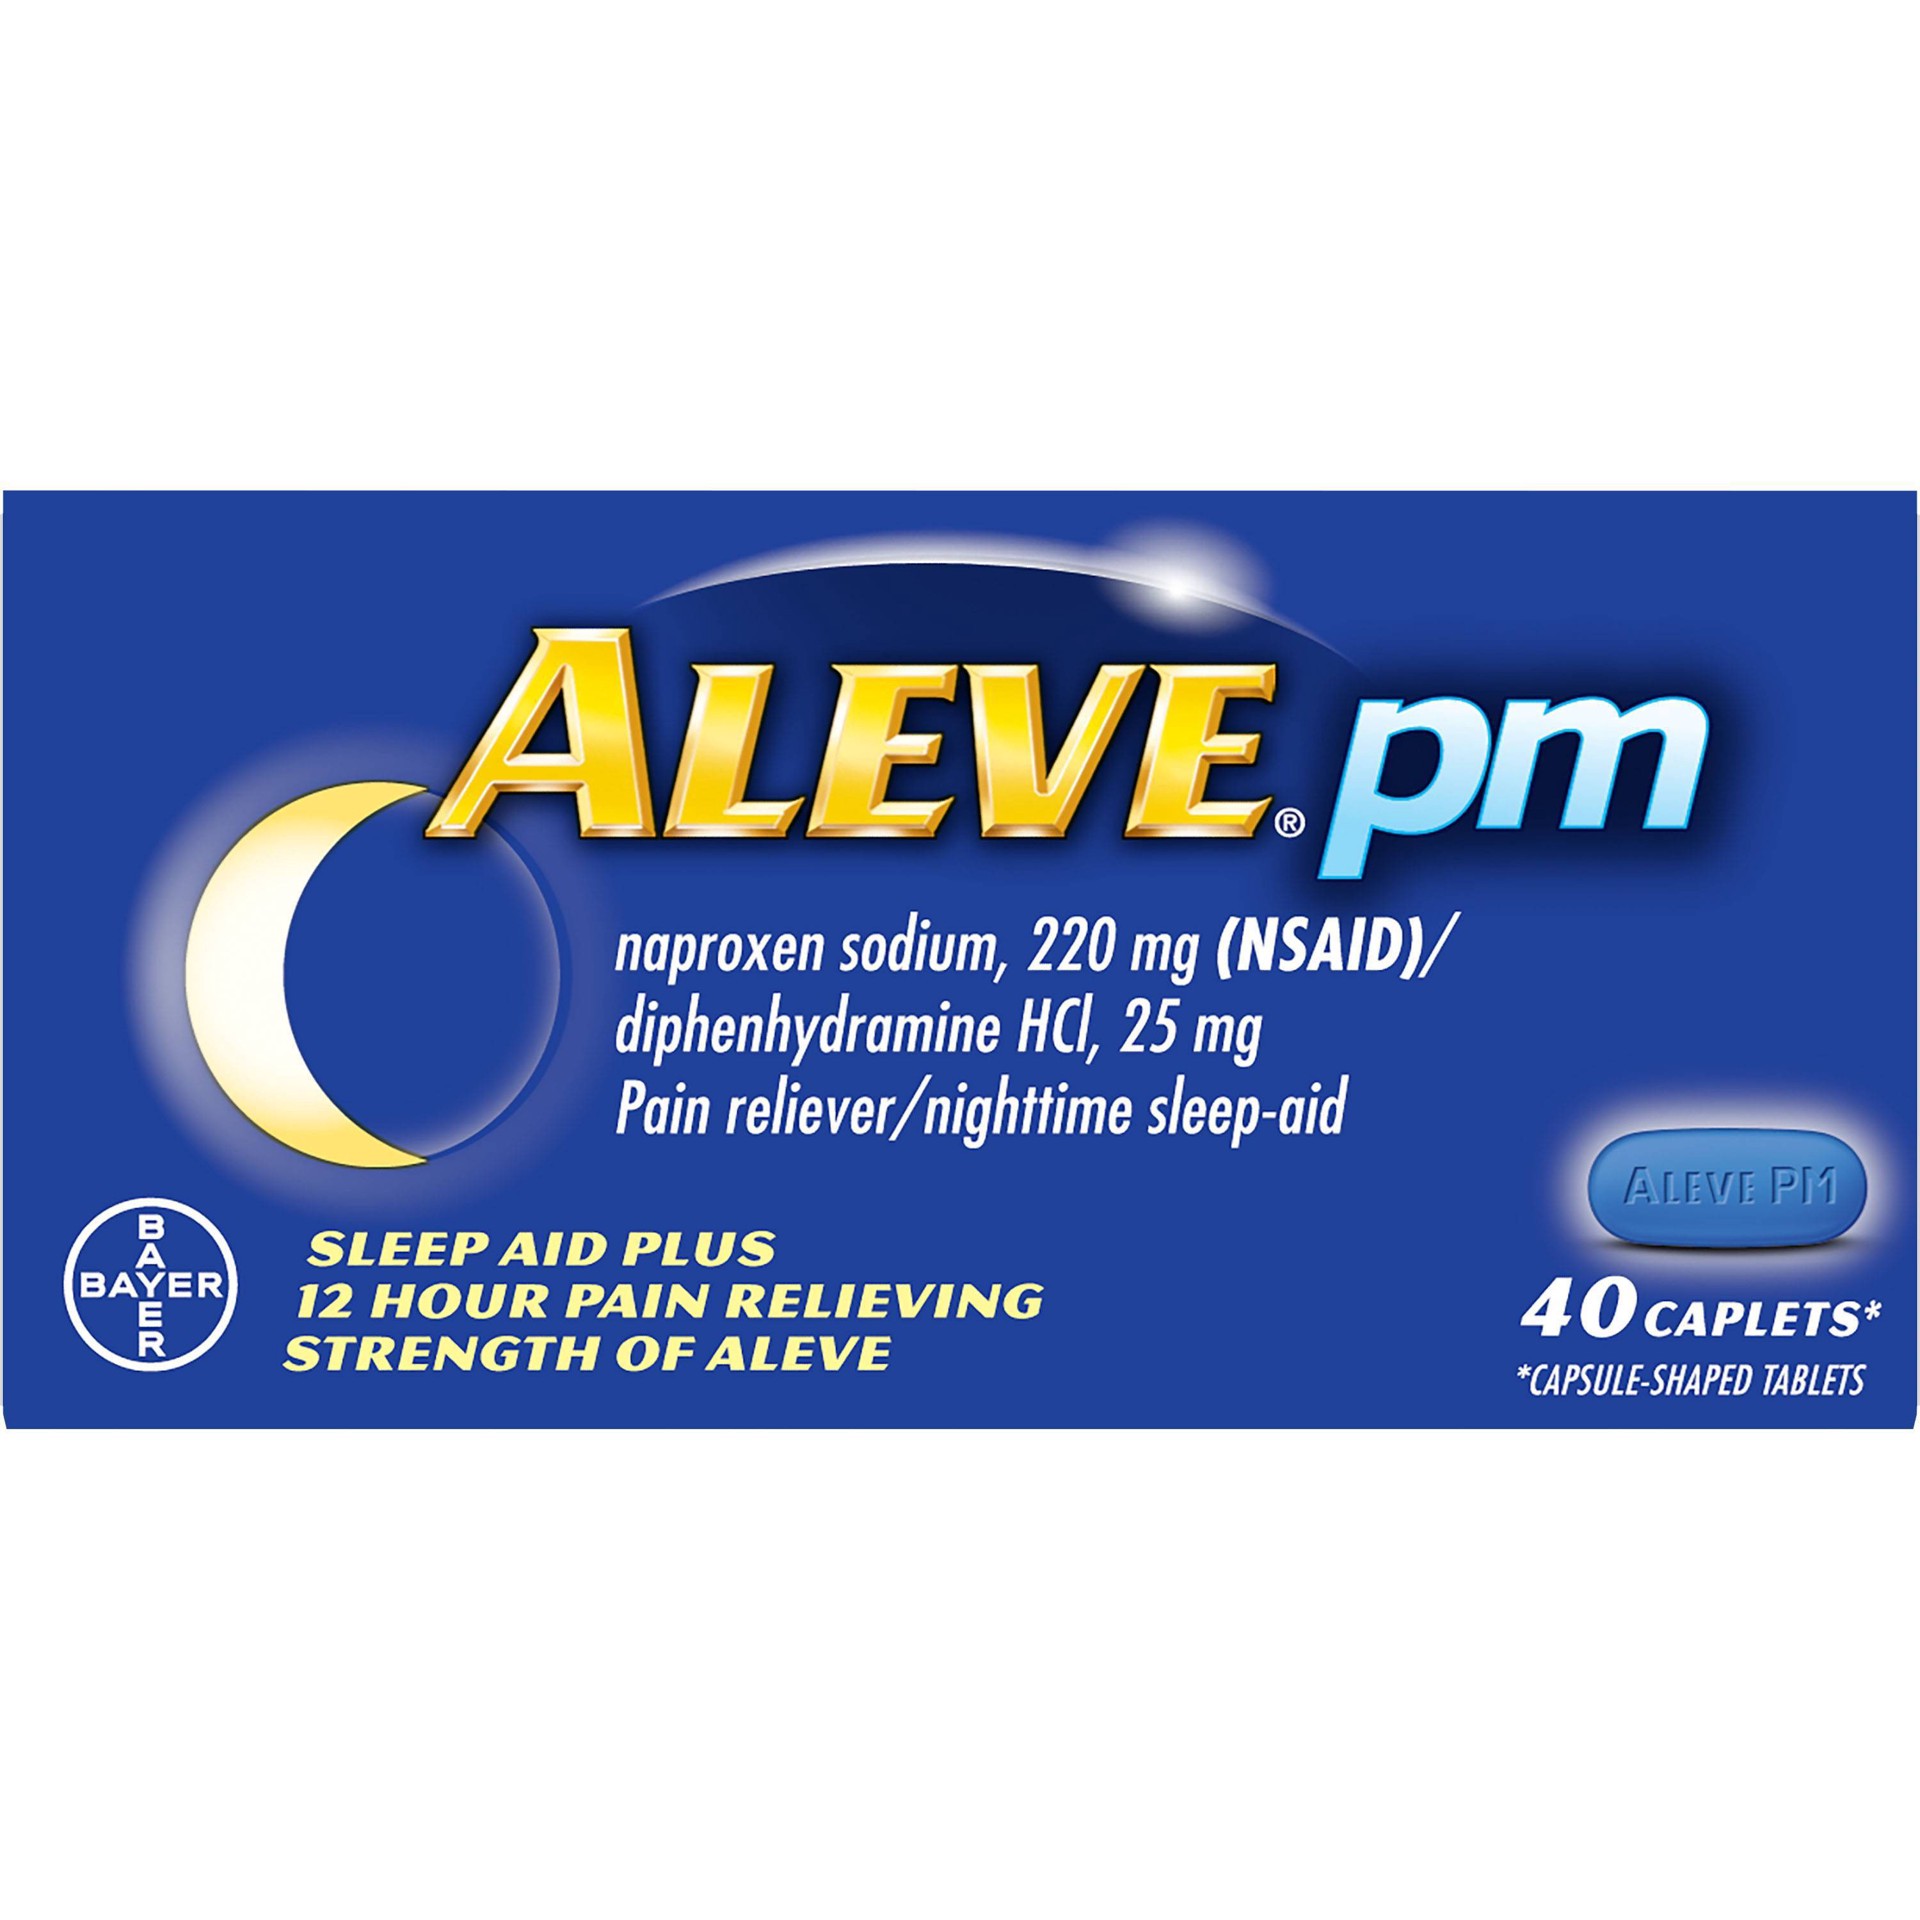 slide 1 of 1, Aleve PM Sleep Aid Plus 12 Hour Pain Relief Caplets - Naproxen Sodium (NSAID)/Diphenhydramine, 40 ct